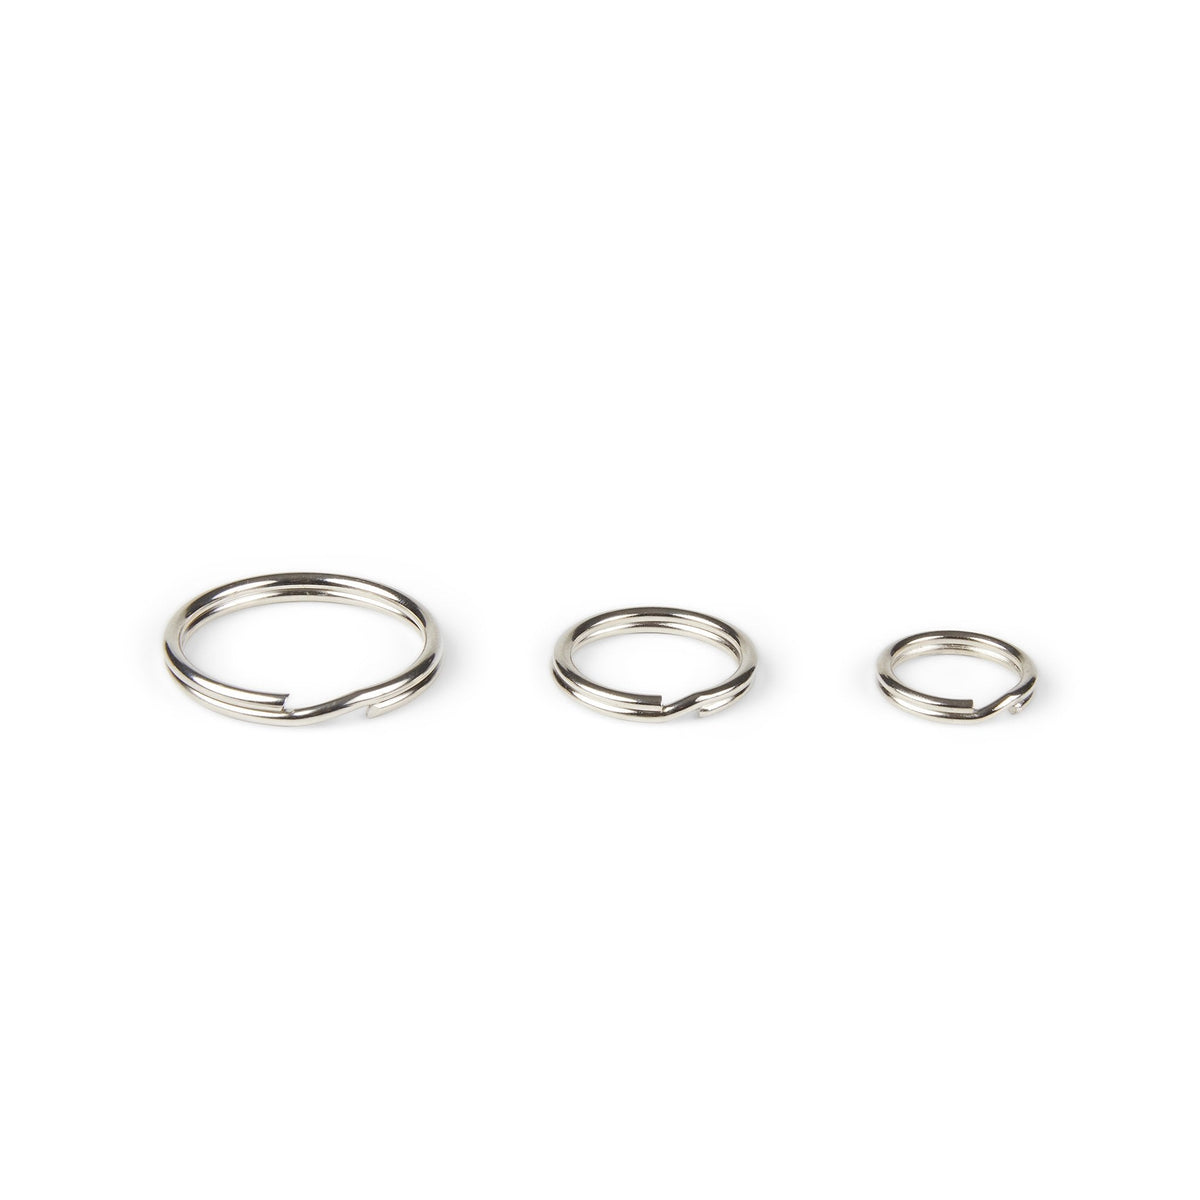 Tool Ring - 25mm (10 Pack)